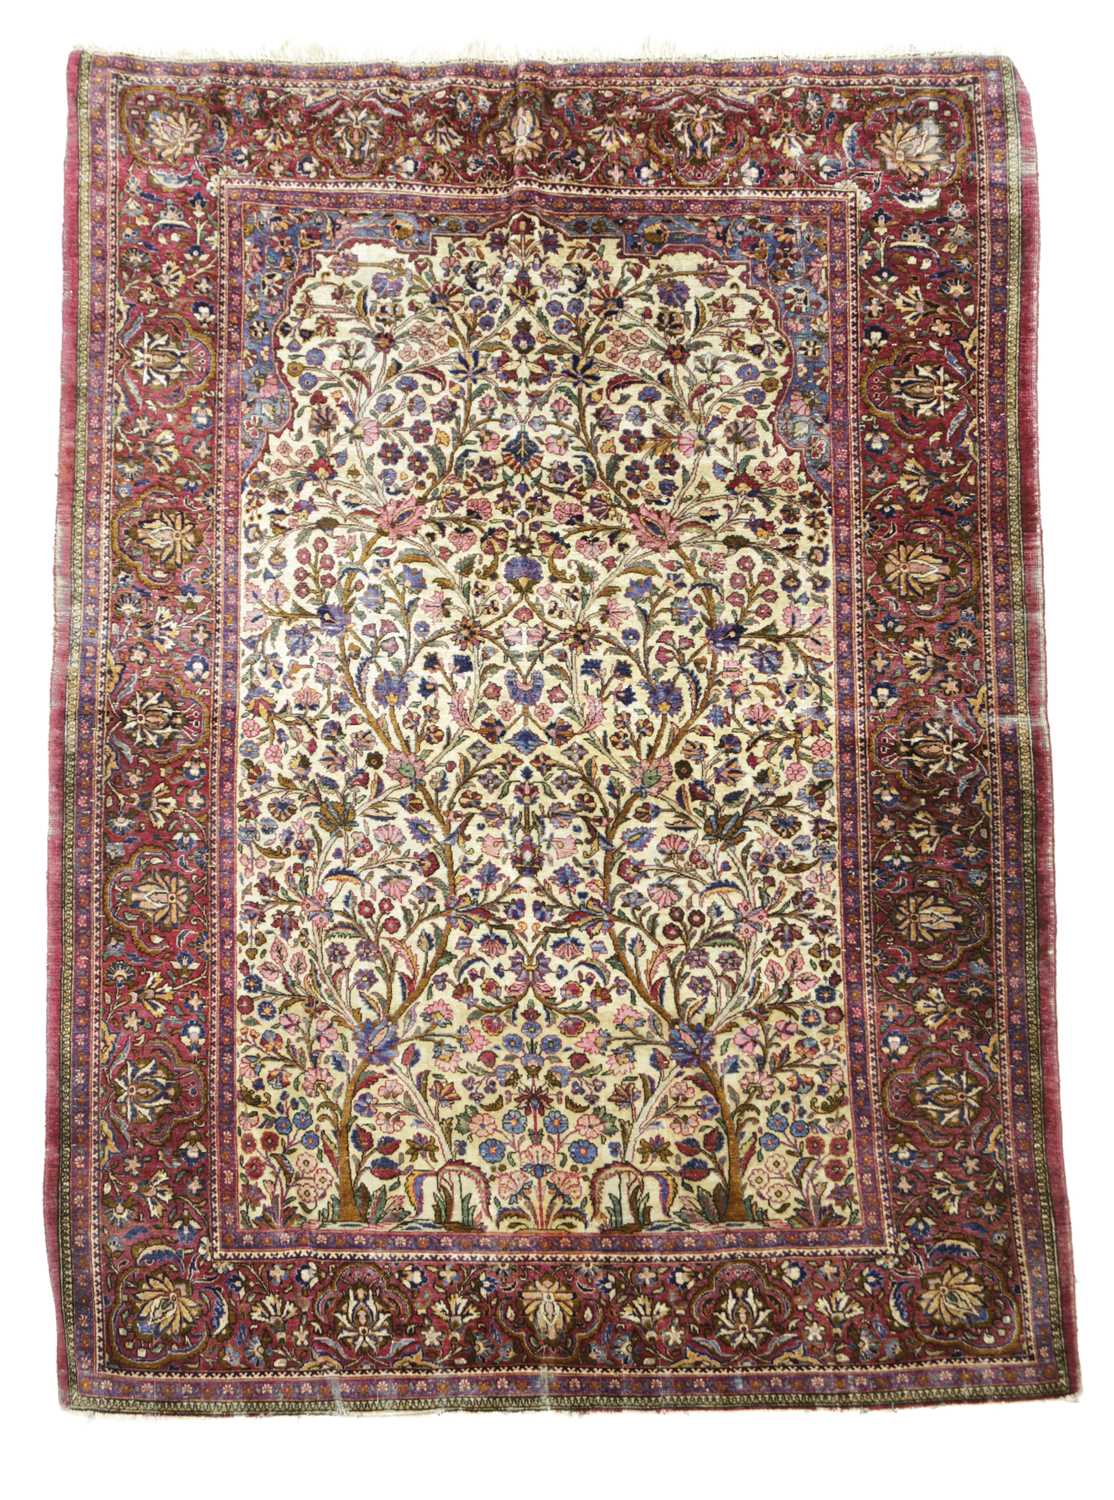 A KASHAN SILK PRAYER RUG C.1930 the ivory field with a tree of life beneath the Mihrab enclosed by